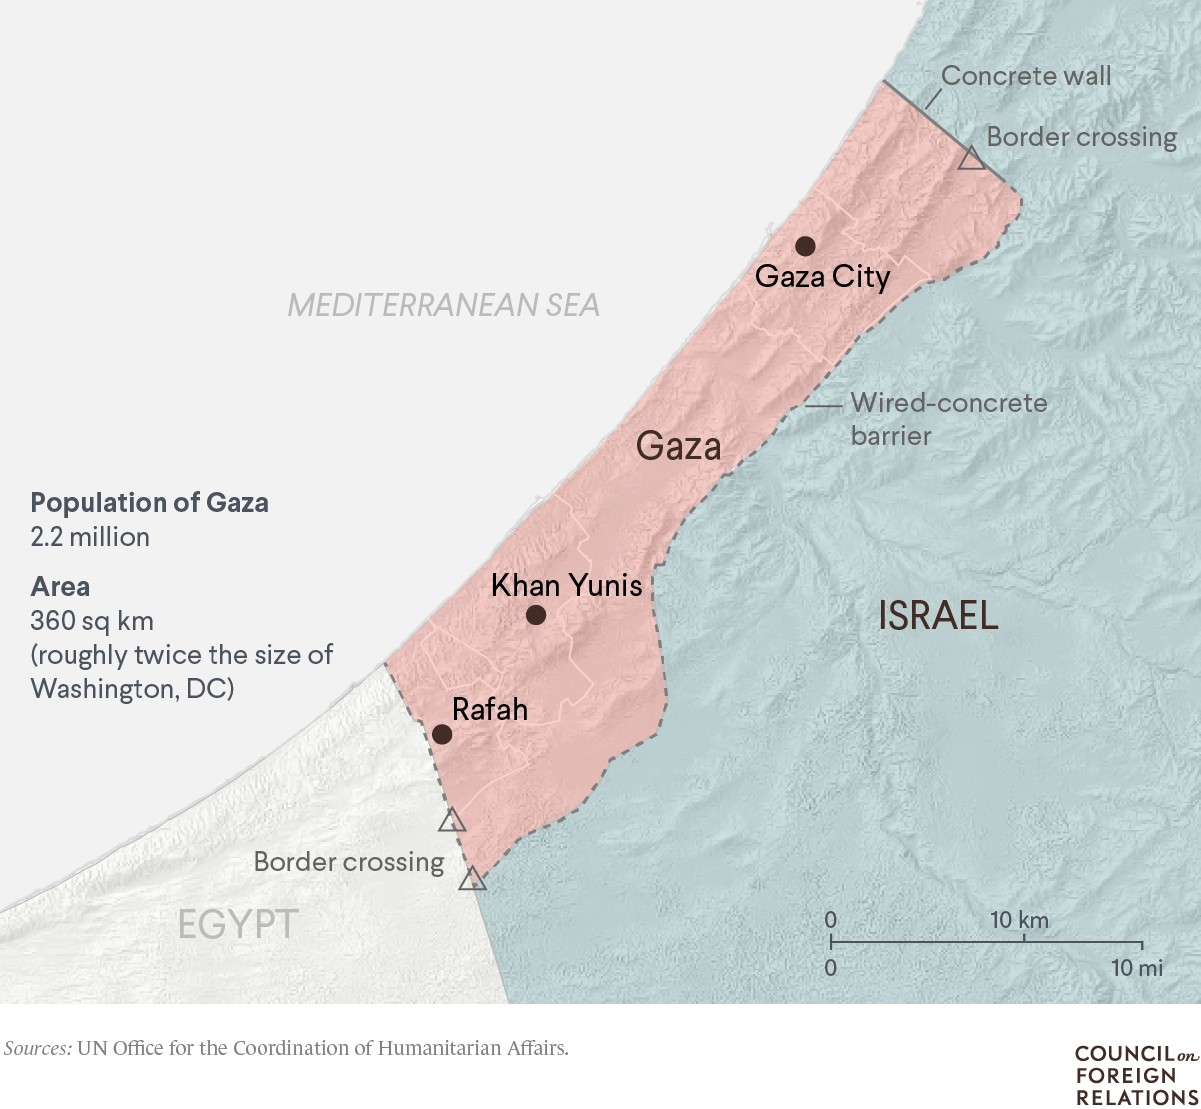 A map of Gaza with data points such as population (2.2 million) and area (360 sq km, roughly twice the size of Washington, DC)